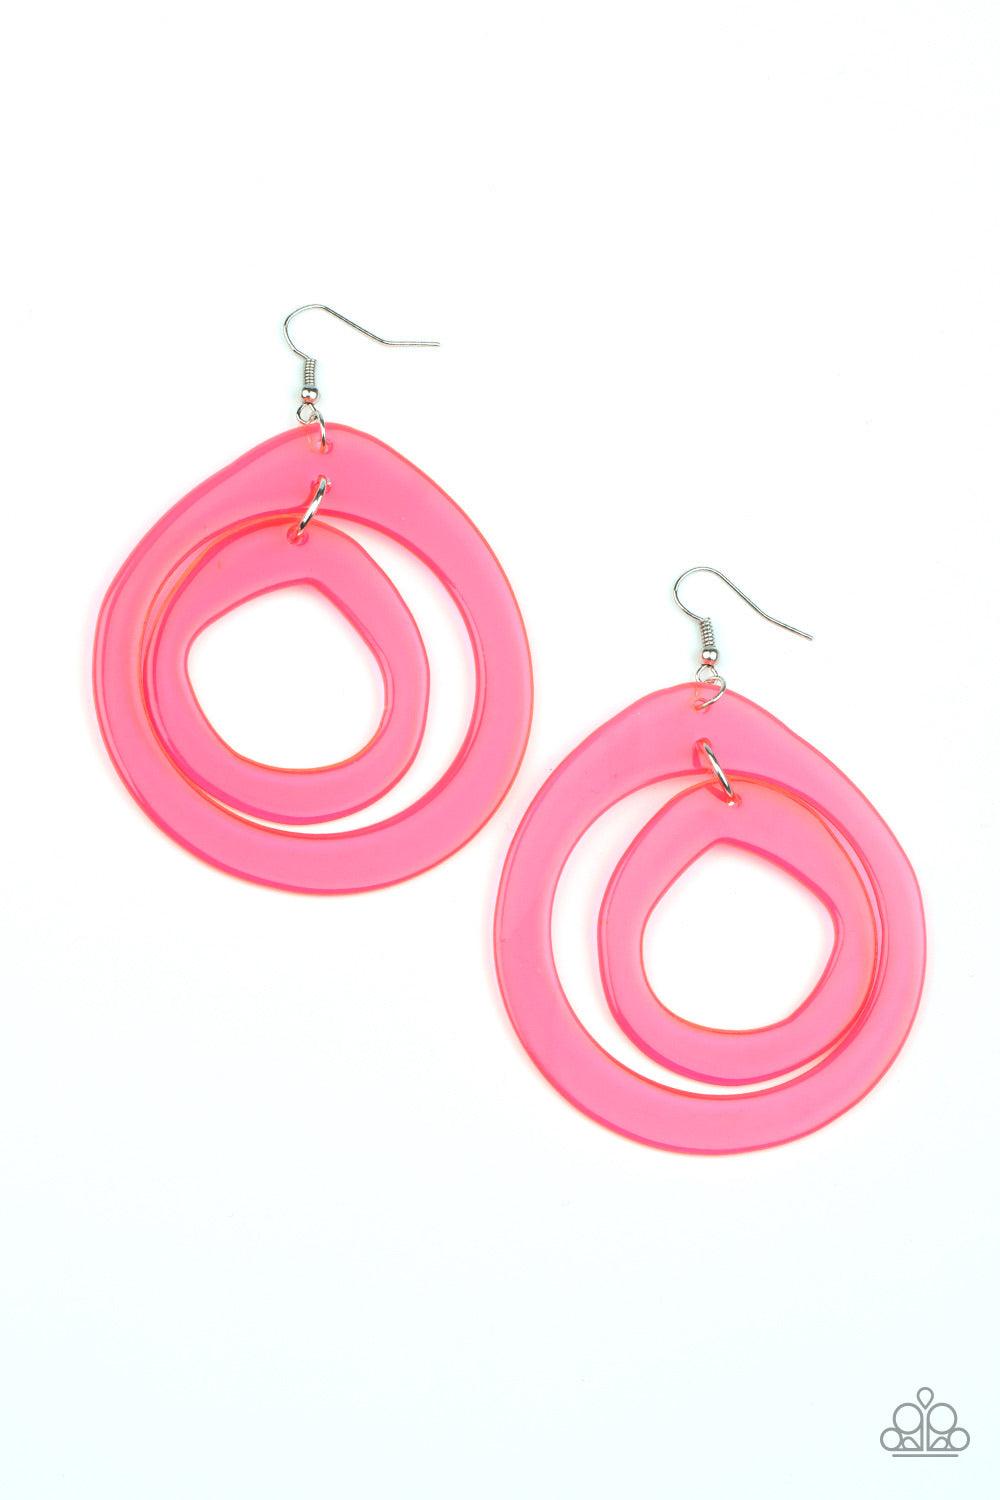 Show Your True NEONS ~Pink - Beautifully Blinged